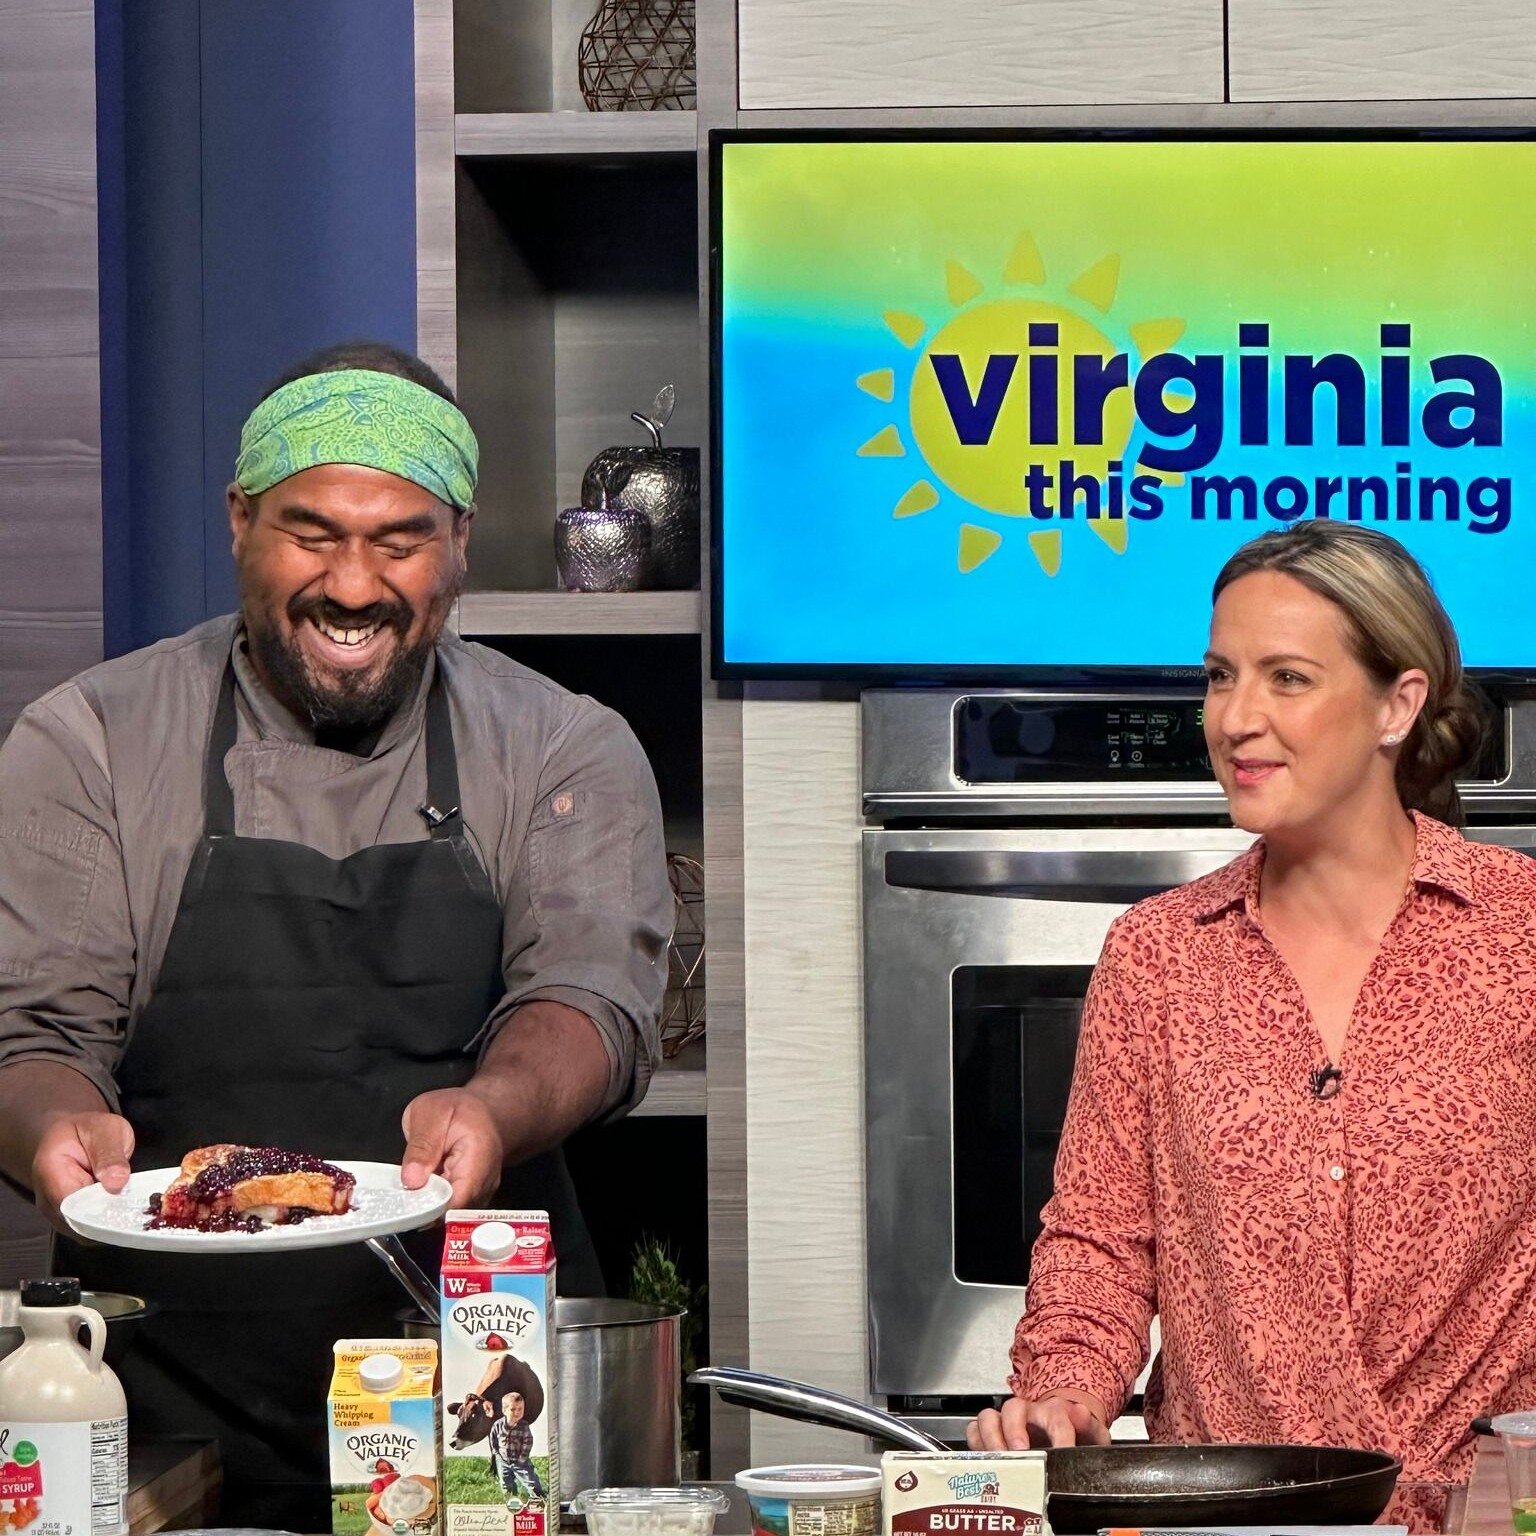 We had an awesome time @virginiathismorning today! 🌞 Executive Chef Xavier made an amazing french toast with berry compote and whipped vanilla goat cheese spread. Stay tuned for the recipe and a chance to grab the french toast in the store to eat! 
